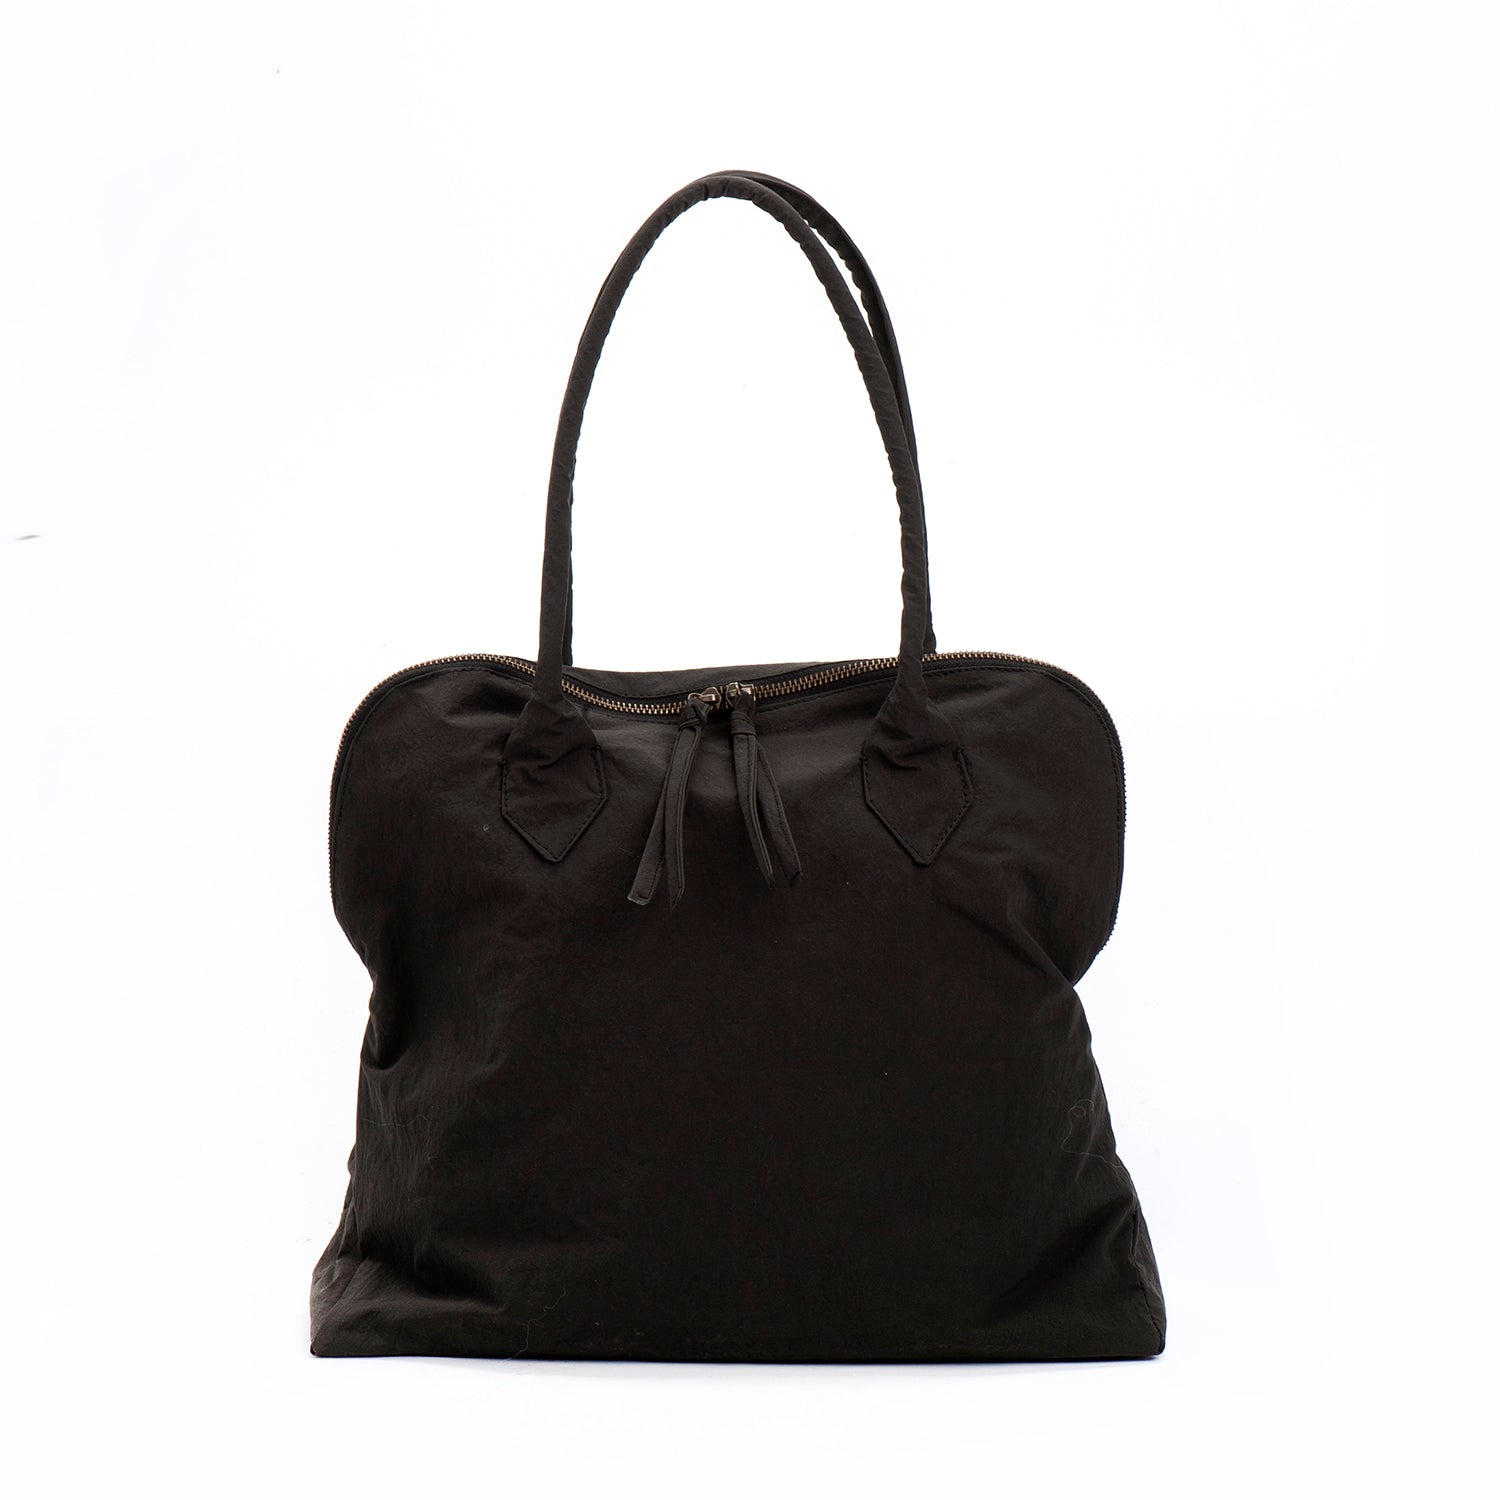 Handbag with Pouch for ladies - WL1256 - WL1256 at Rs 475.15 | Gifts for  all occasions by Wedtree